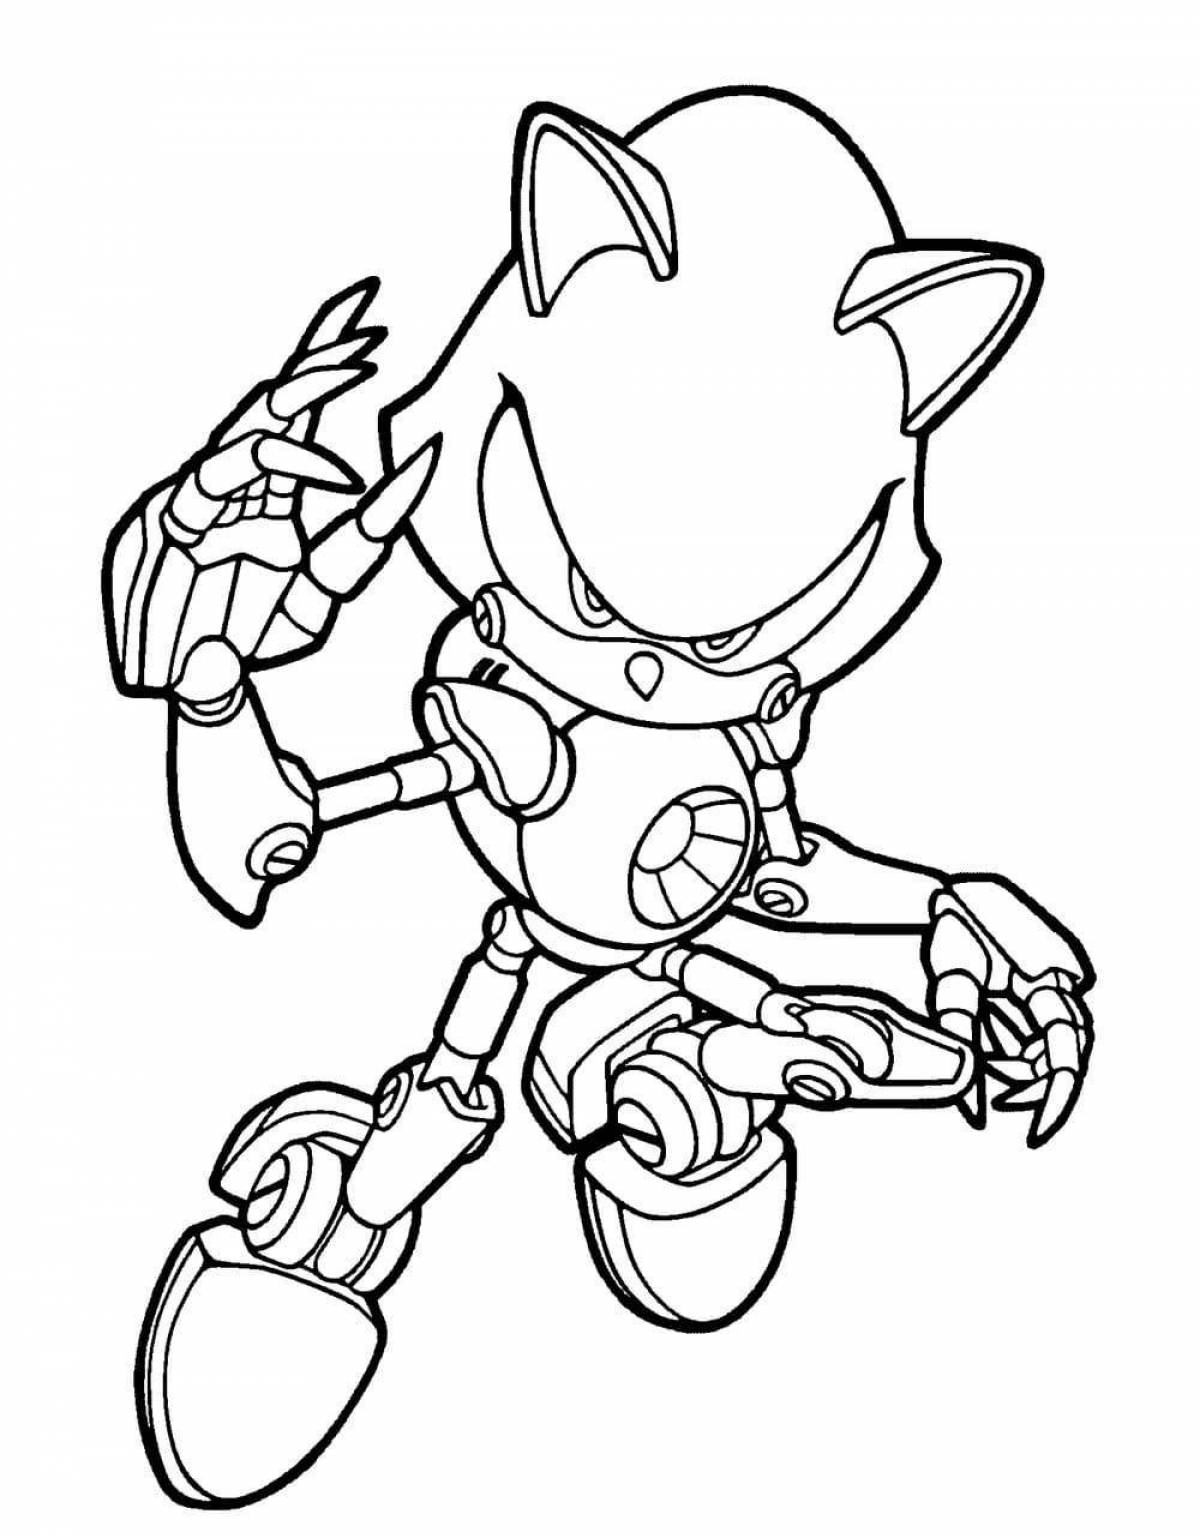 Sonic prime glowing coloring book